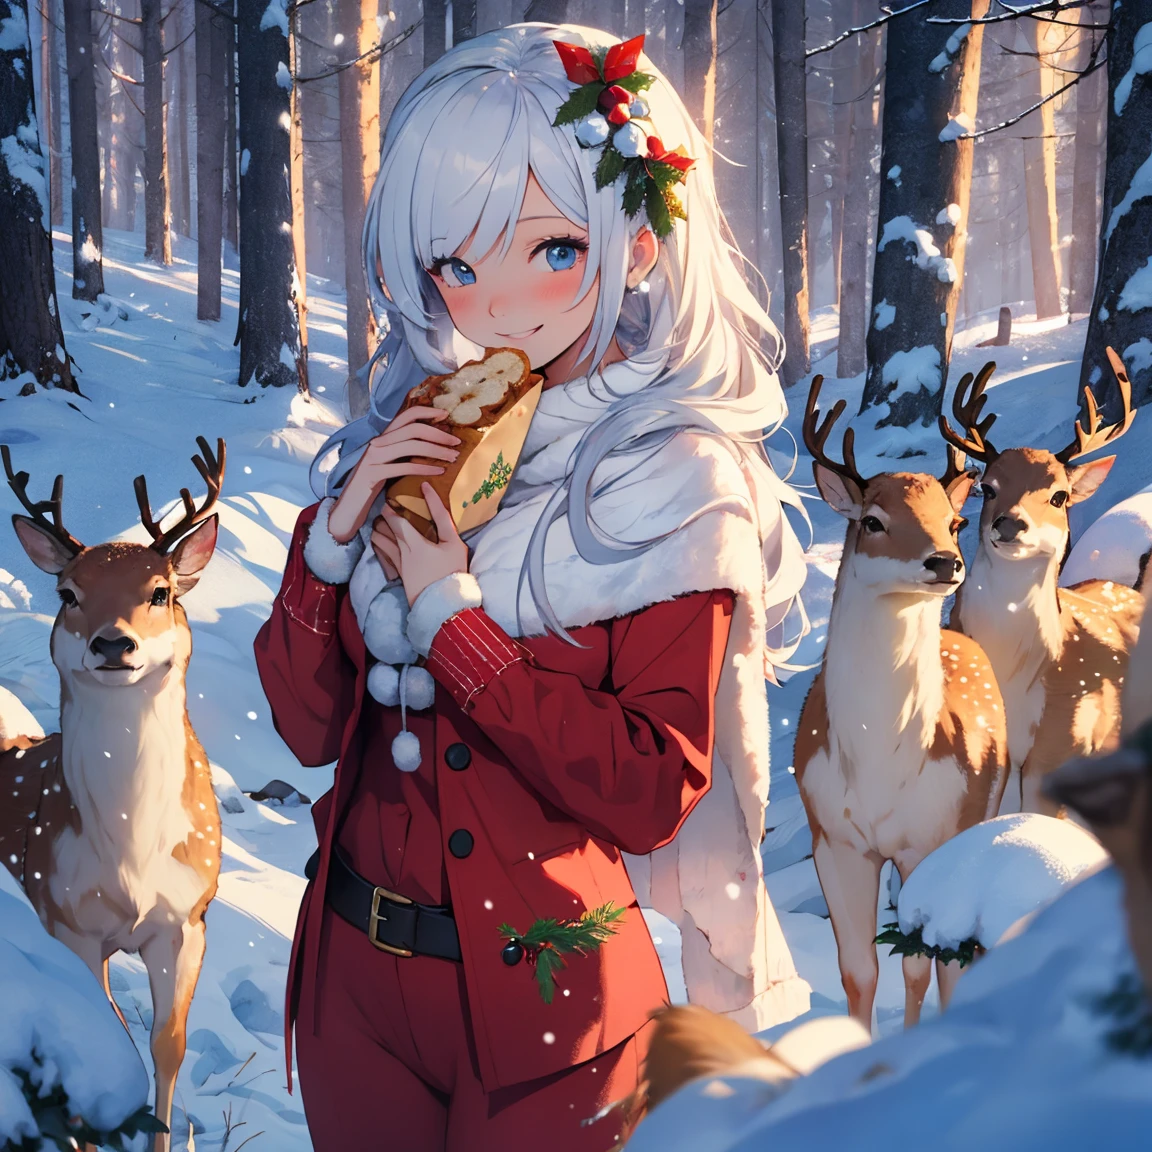 Merry Christmas, Snow Maiden in a sexy red suit, Smiling, Forest deer, Snow Maiden feeds deer bread, forest with trees, garlands on branches